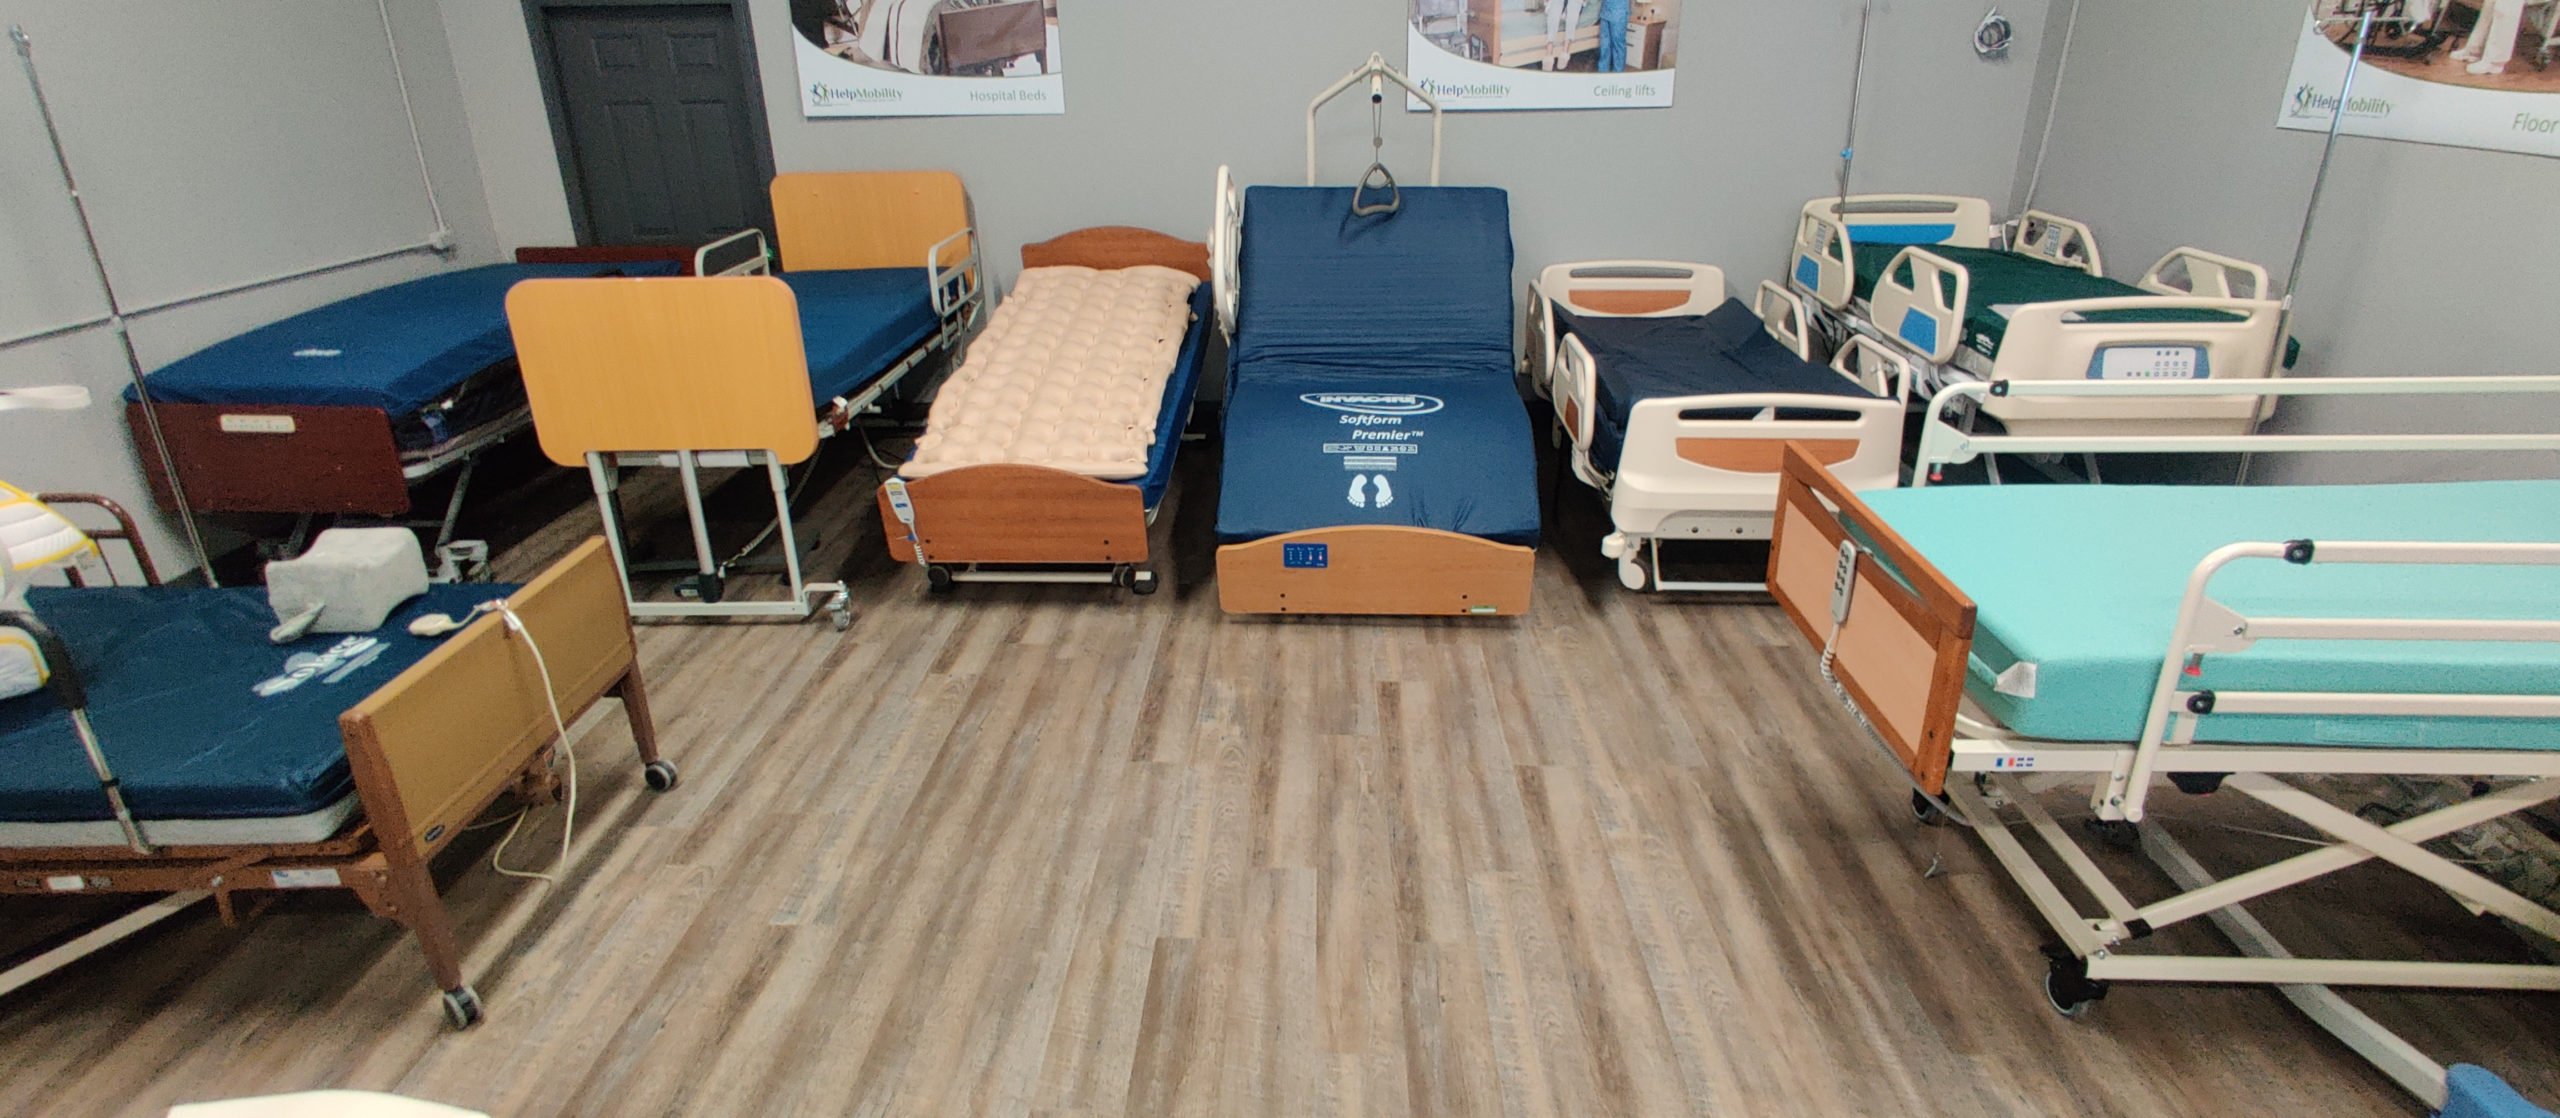 What are the dimensions of home hospital bed